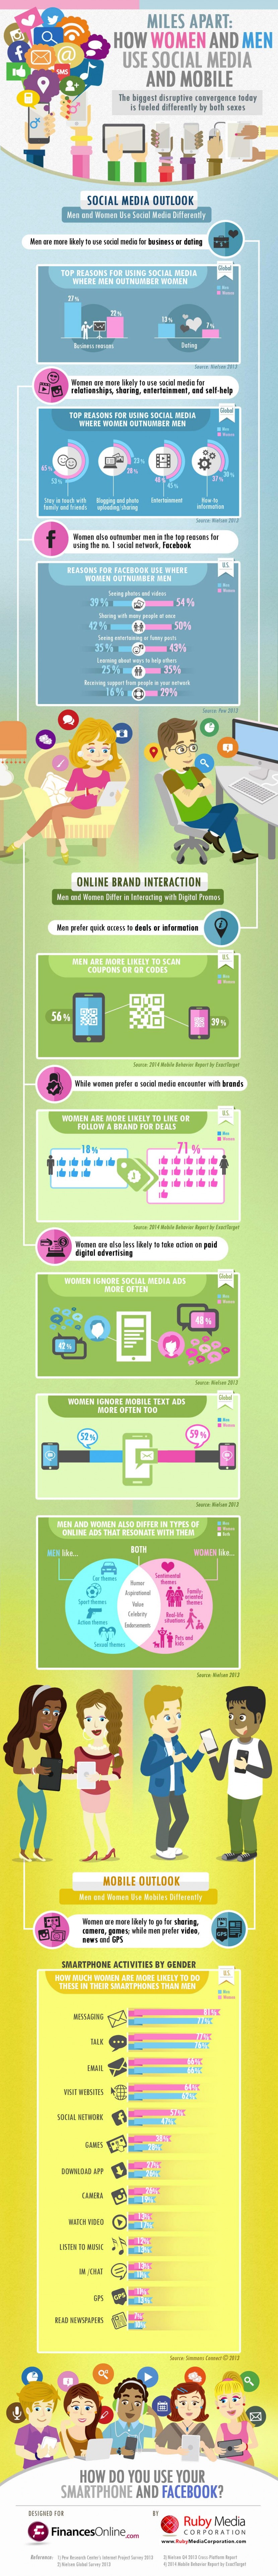 Infographie 106 -how-men-women-social-media-differently-infographic